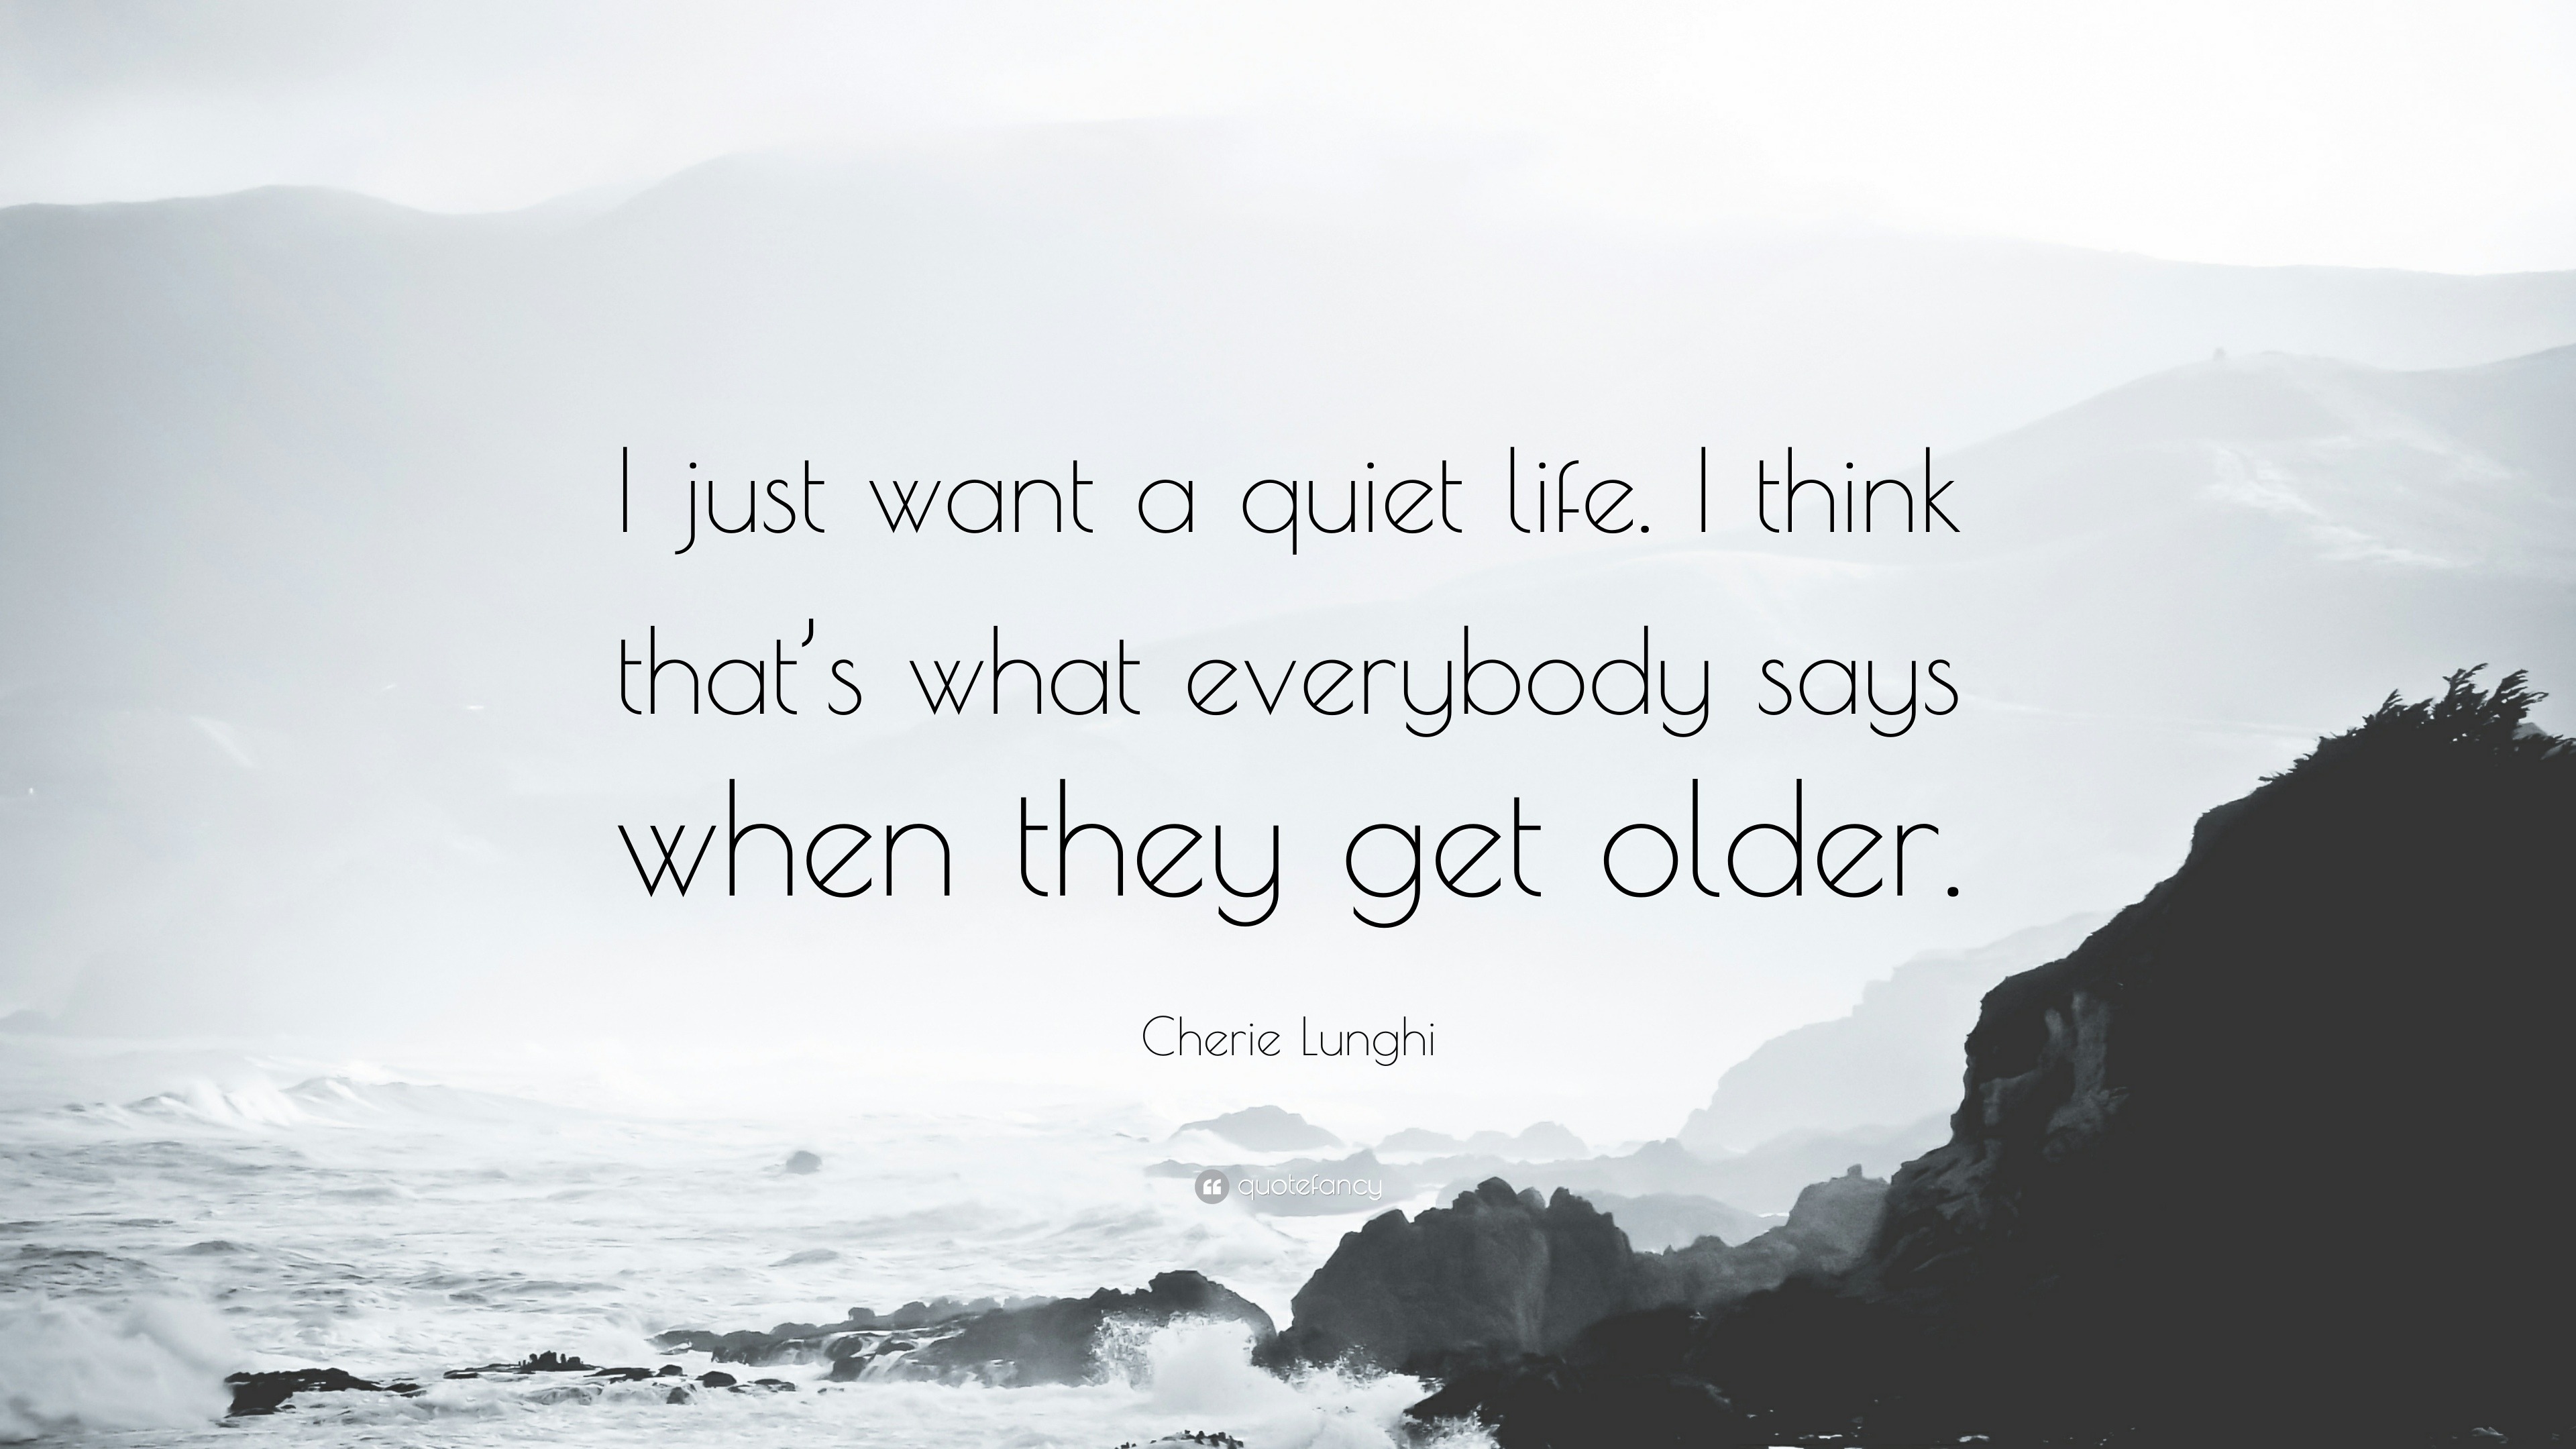 Be Quiet Quotes About Life - Dolly Gabrila